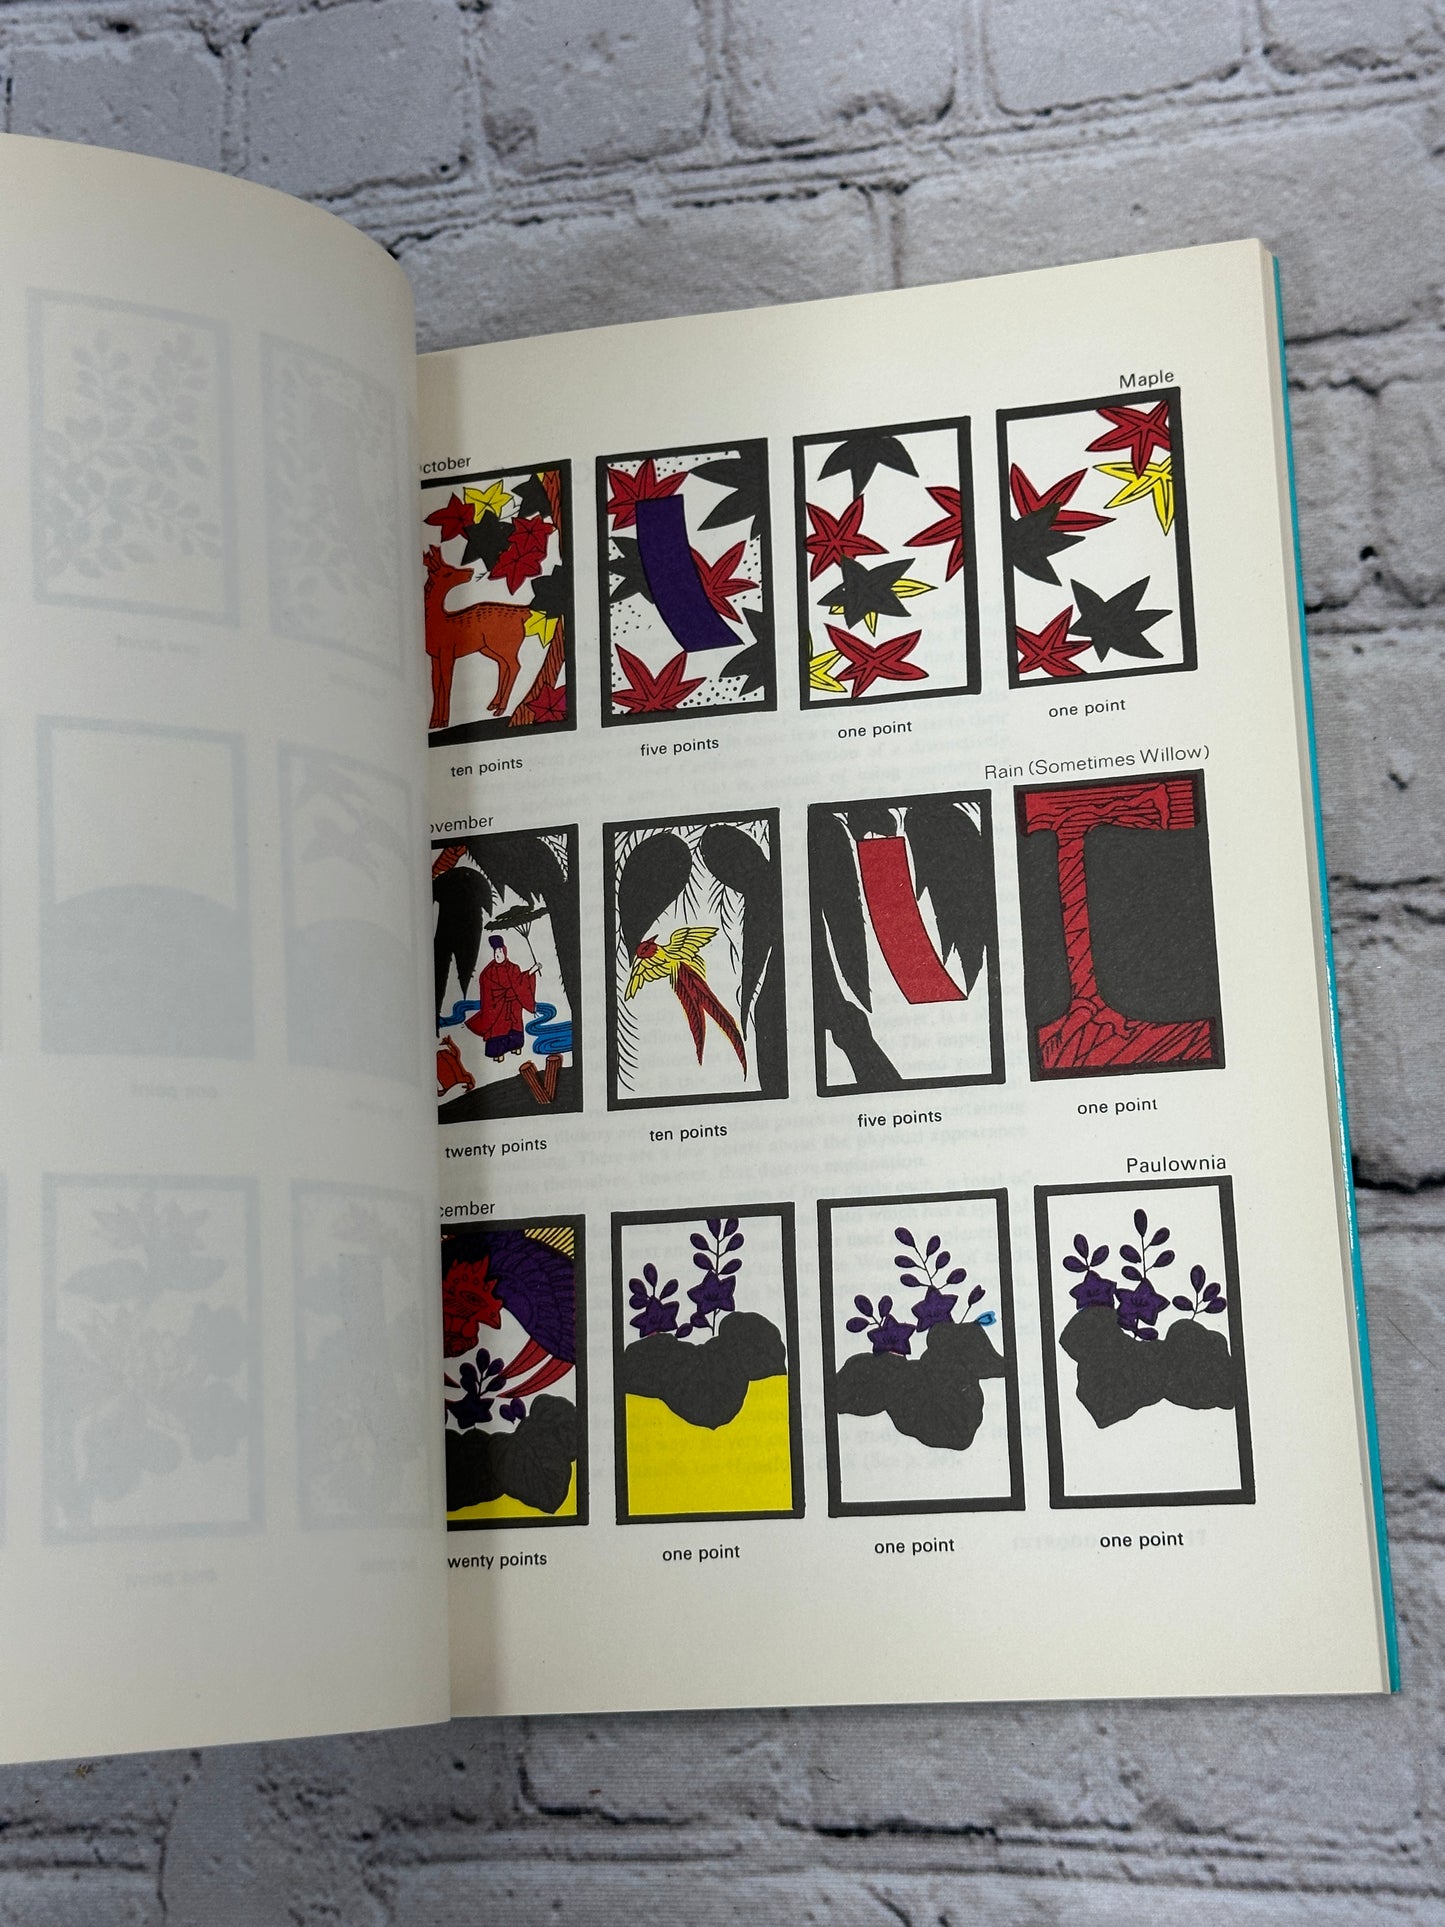 Hanafuda: The Flower Card Game Compiled by Japan Publications [1988 · 8th Print]